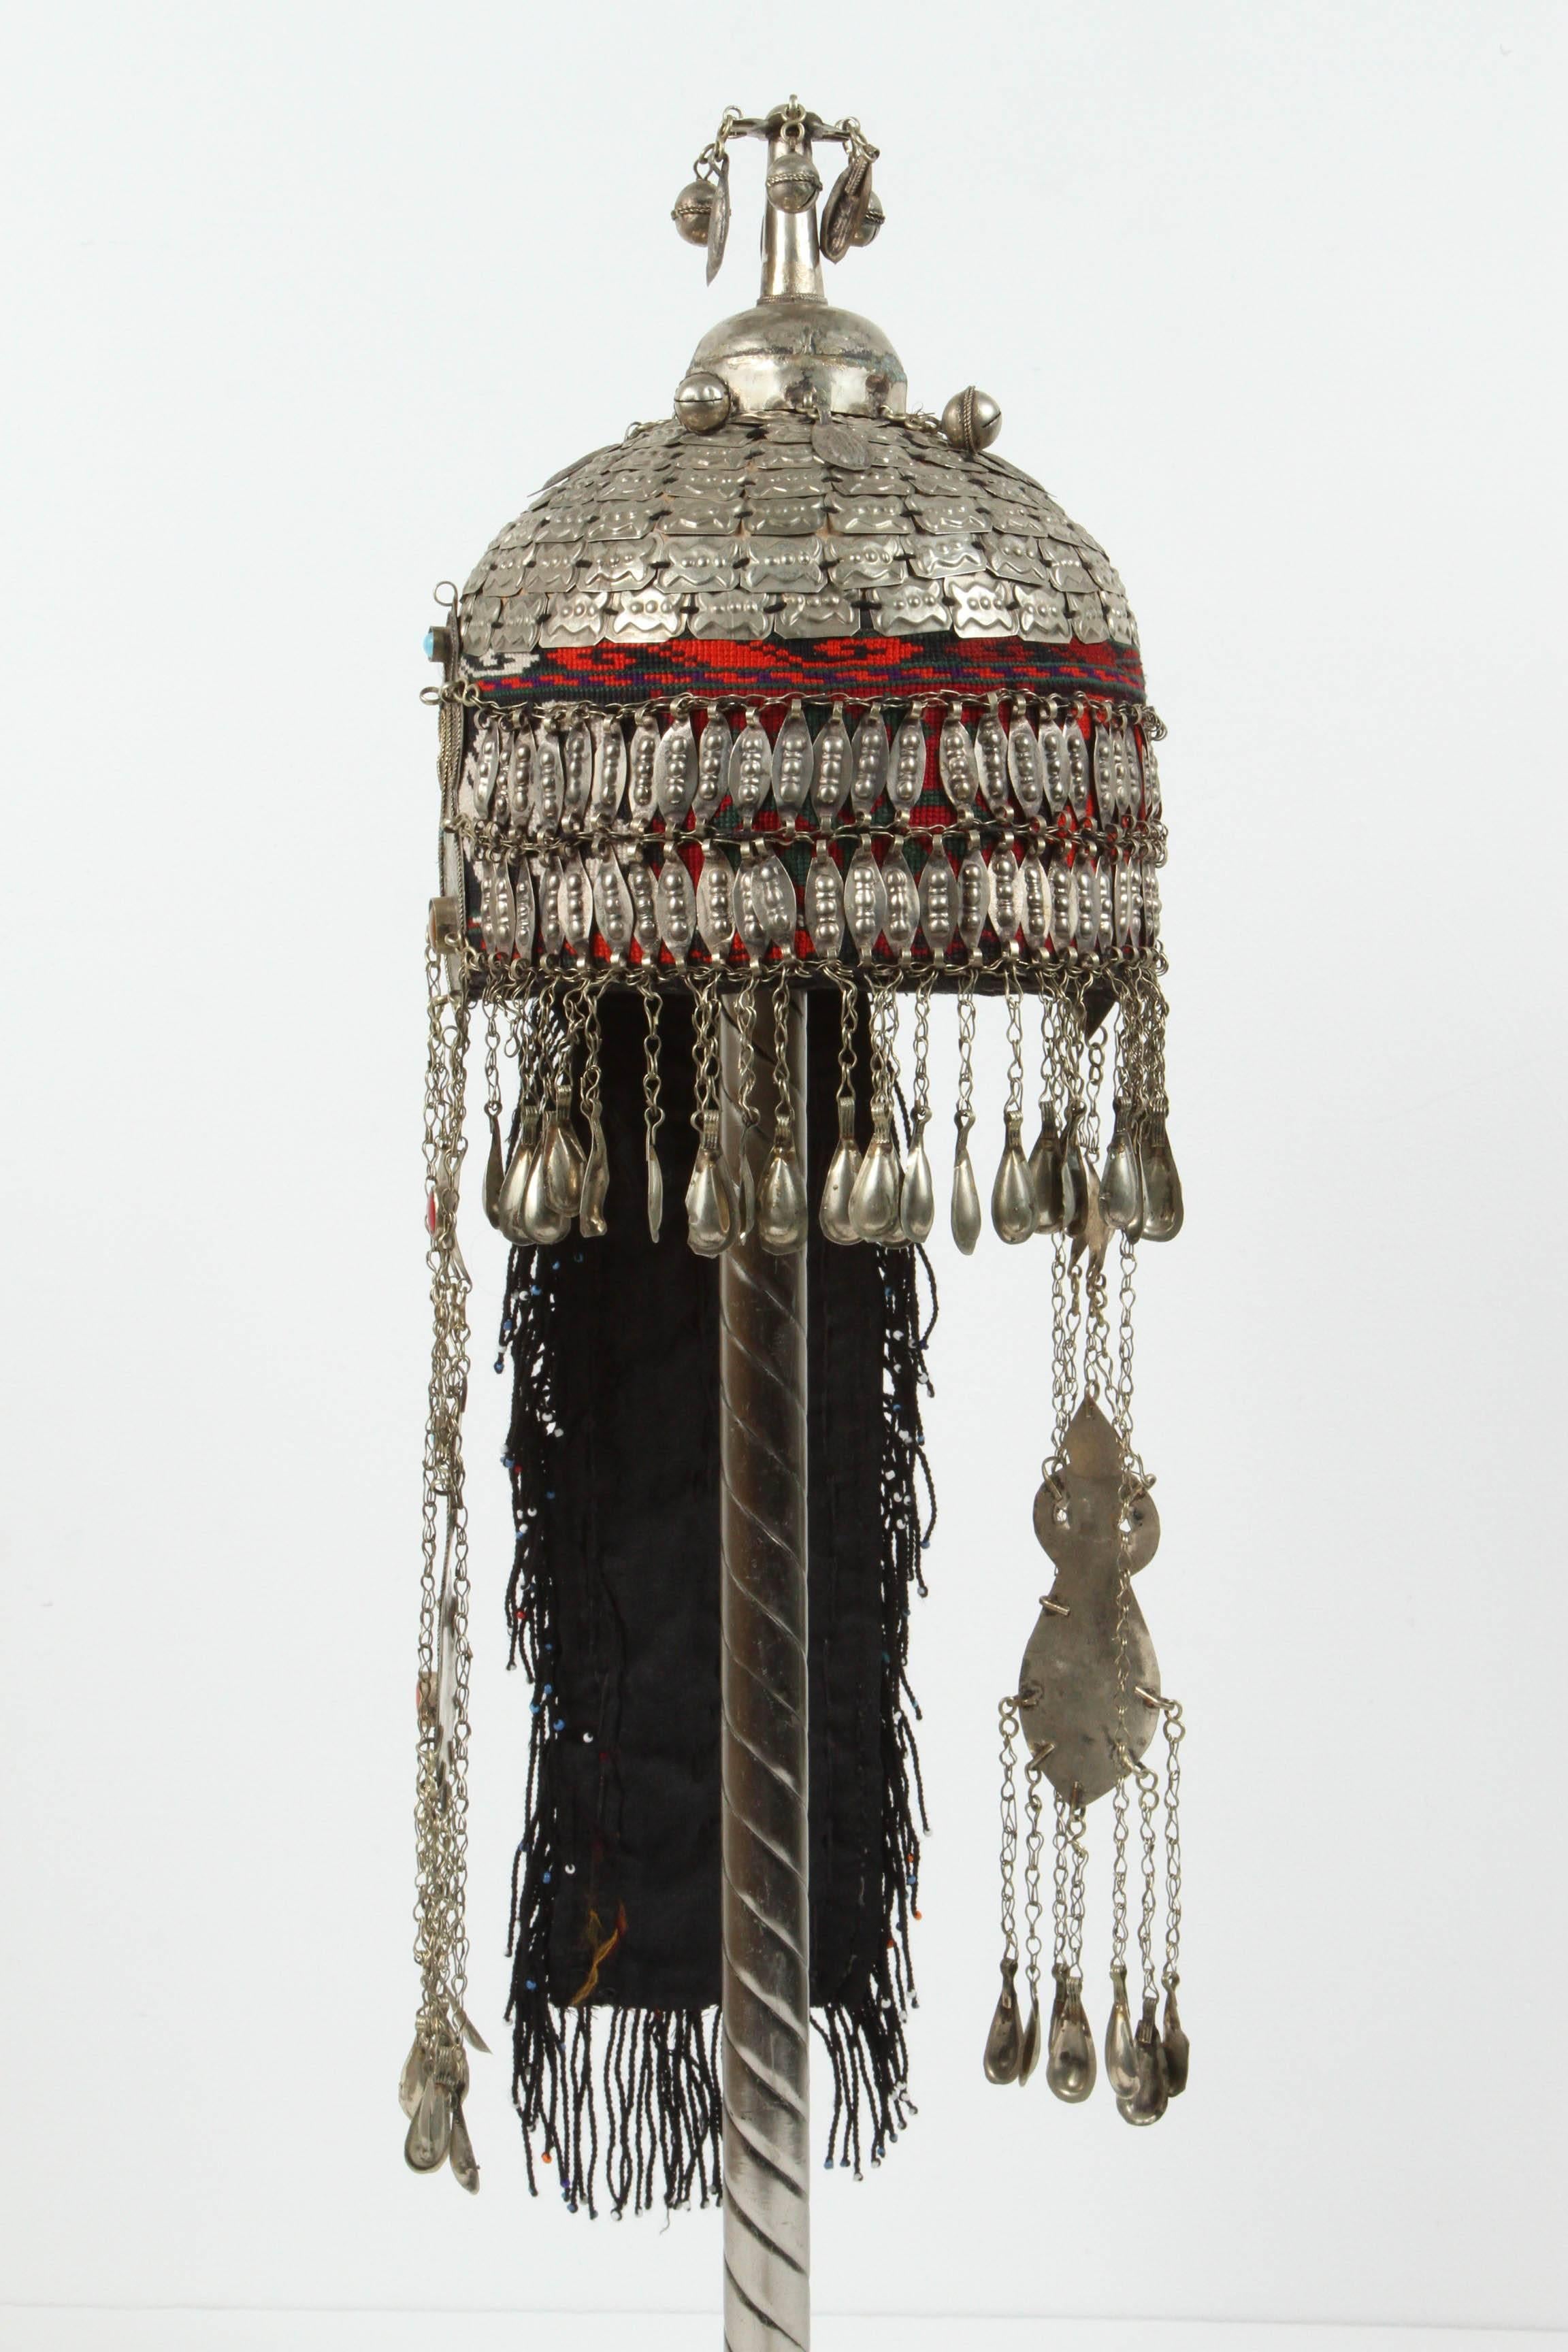 Ceremonial Wedding Ethnic Mongolian head dress and necklace mounted on stand
The headdress is shaped somewhat like a helmet covered with hand woven fabric and is totally encrusted with silver buttons, ornaments, coins and beads, 
